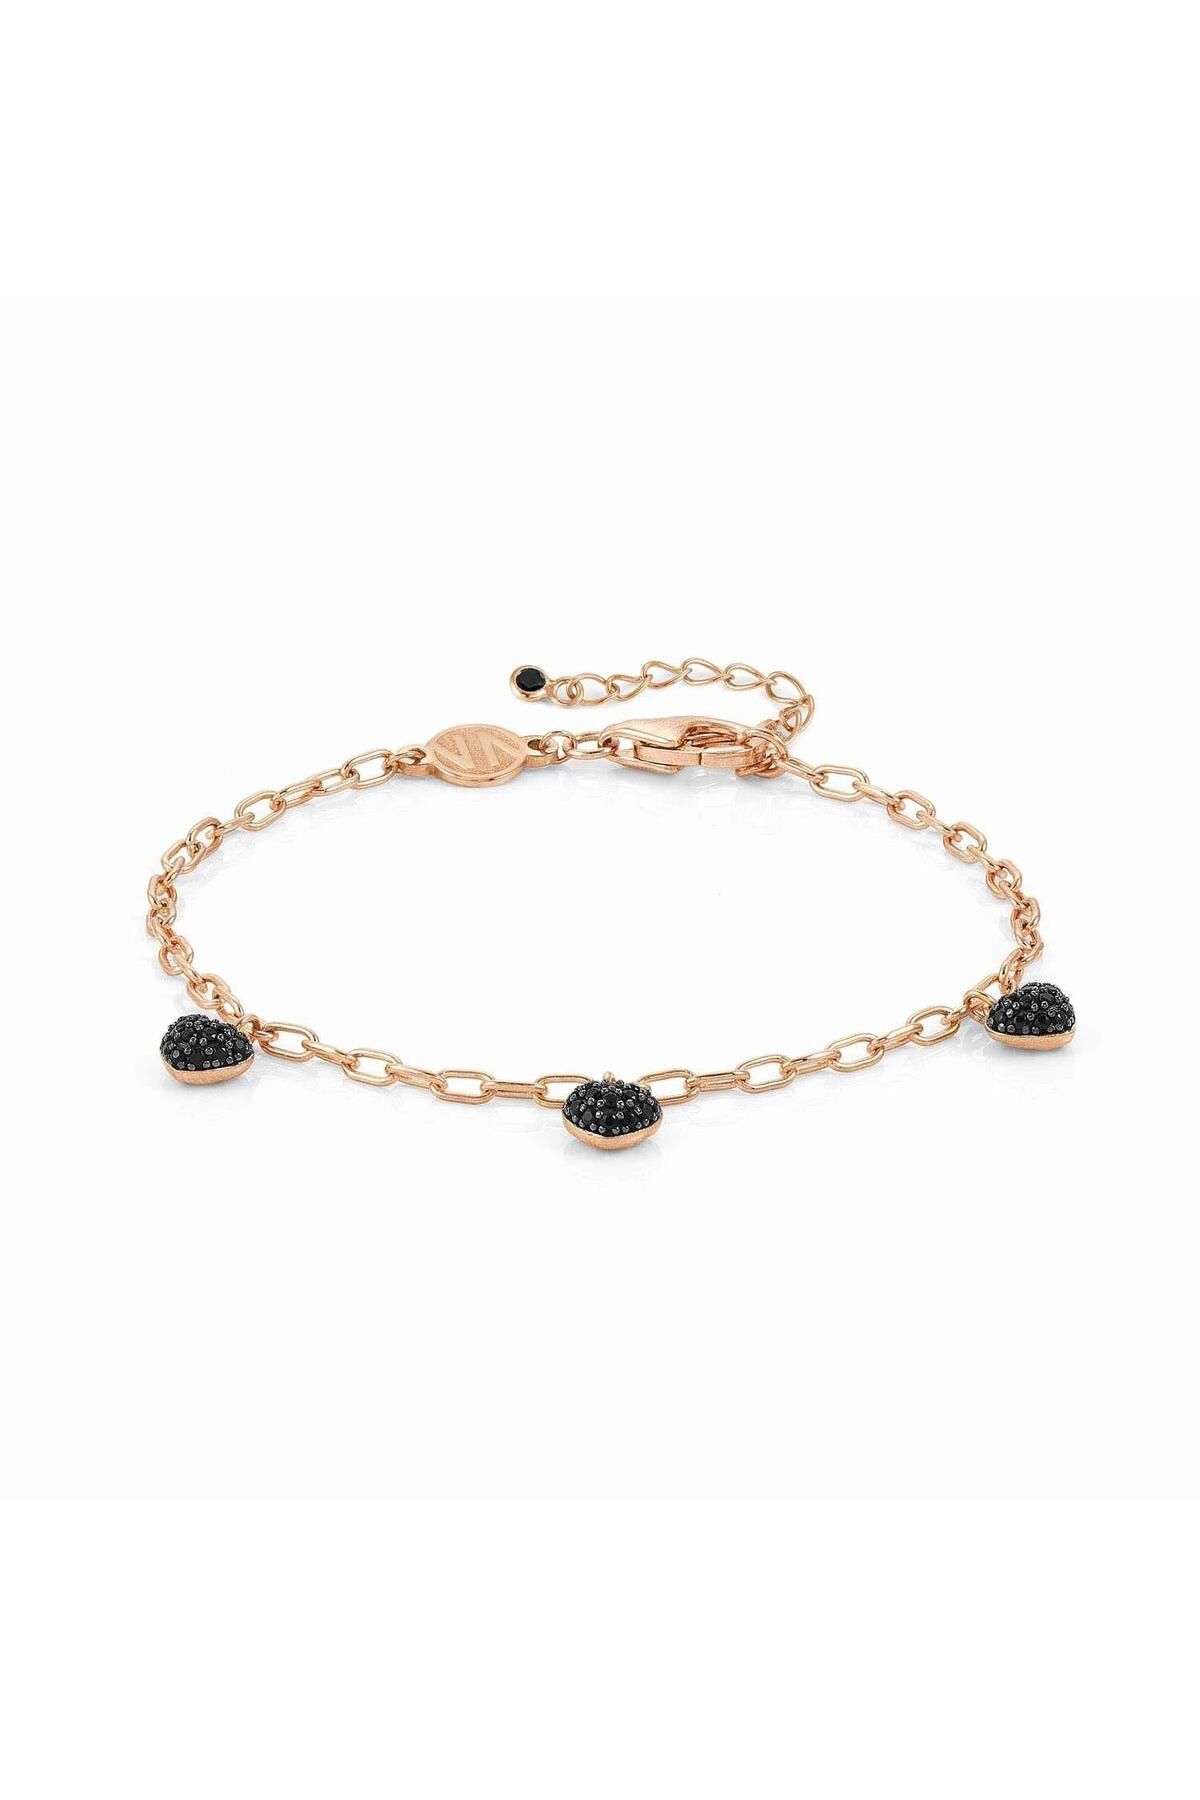 NOMİNATİON Easychıc Bracelet Ed, Love In 925 Silver And Cubic Zirconia (020_rose Gold Black Heart)